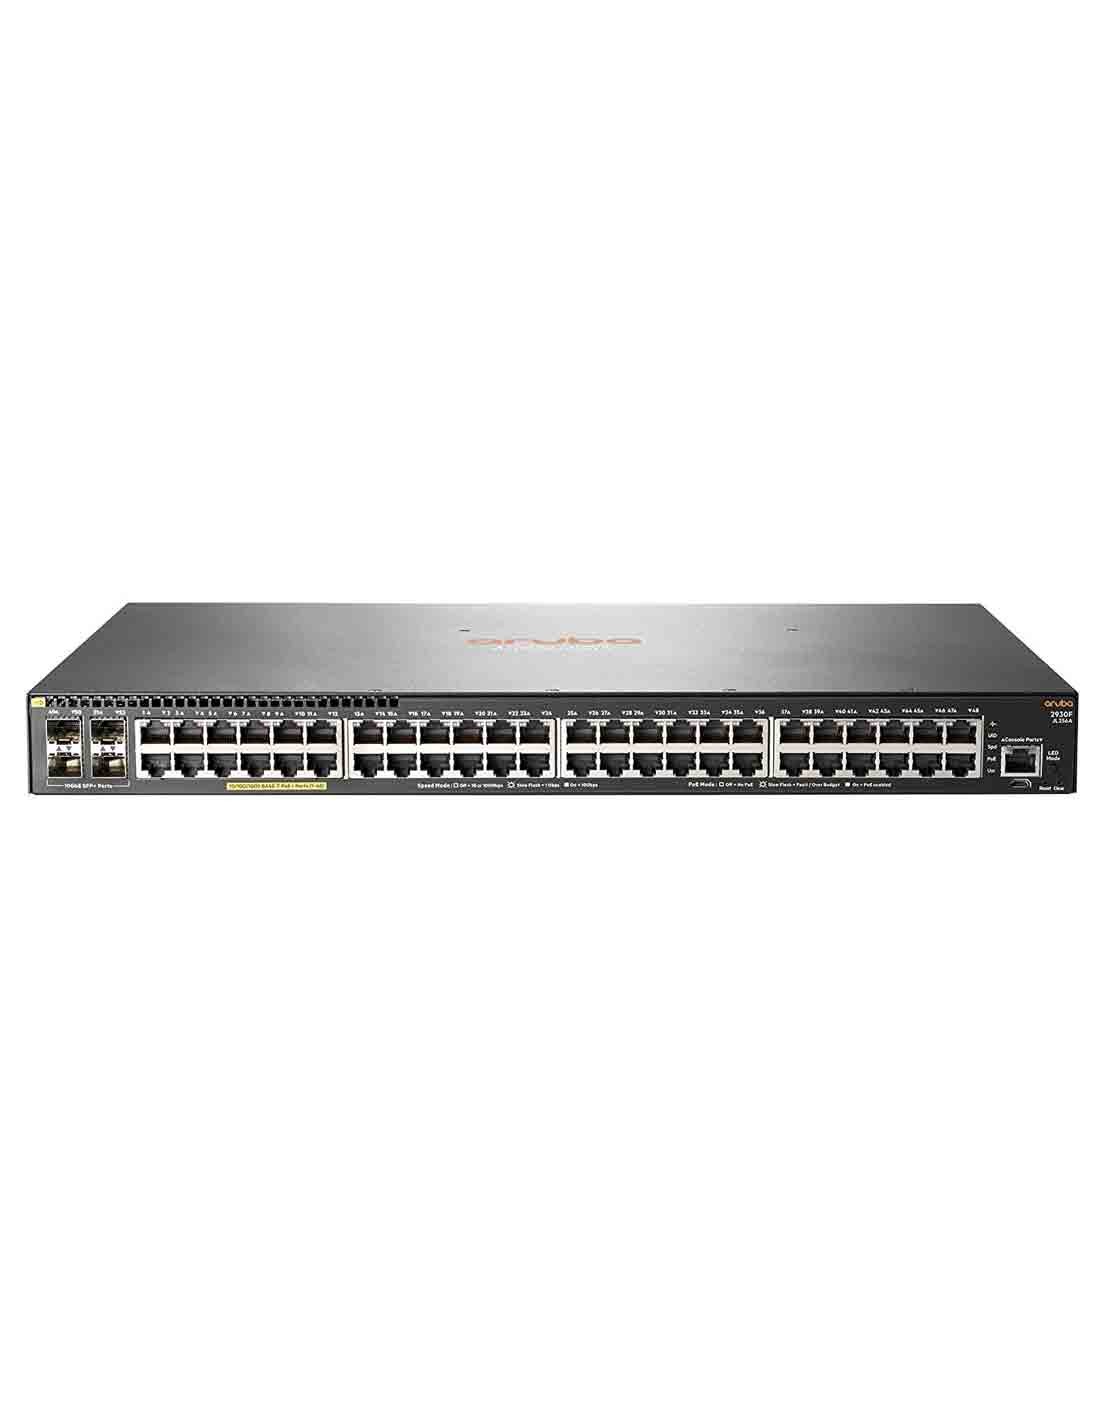 Aruba 2930F 48G PoE+ 4SFP+ Switch JL256A at a cheap price and free delivery in Dubai